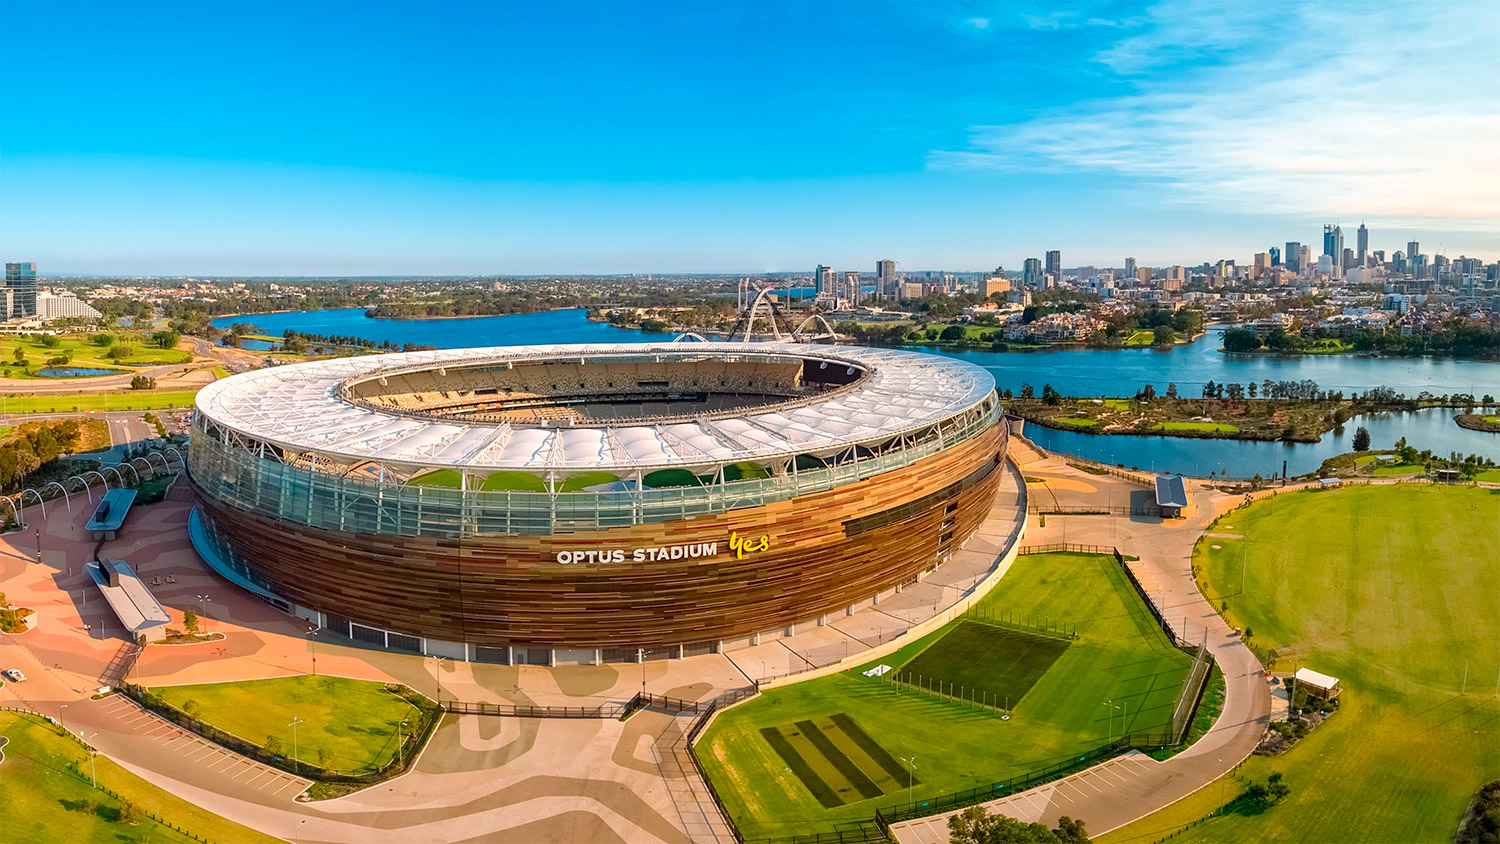 Aerial view of Optus Stadium looking towards the city of Perth